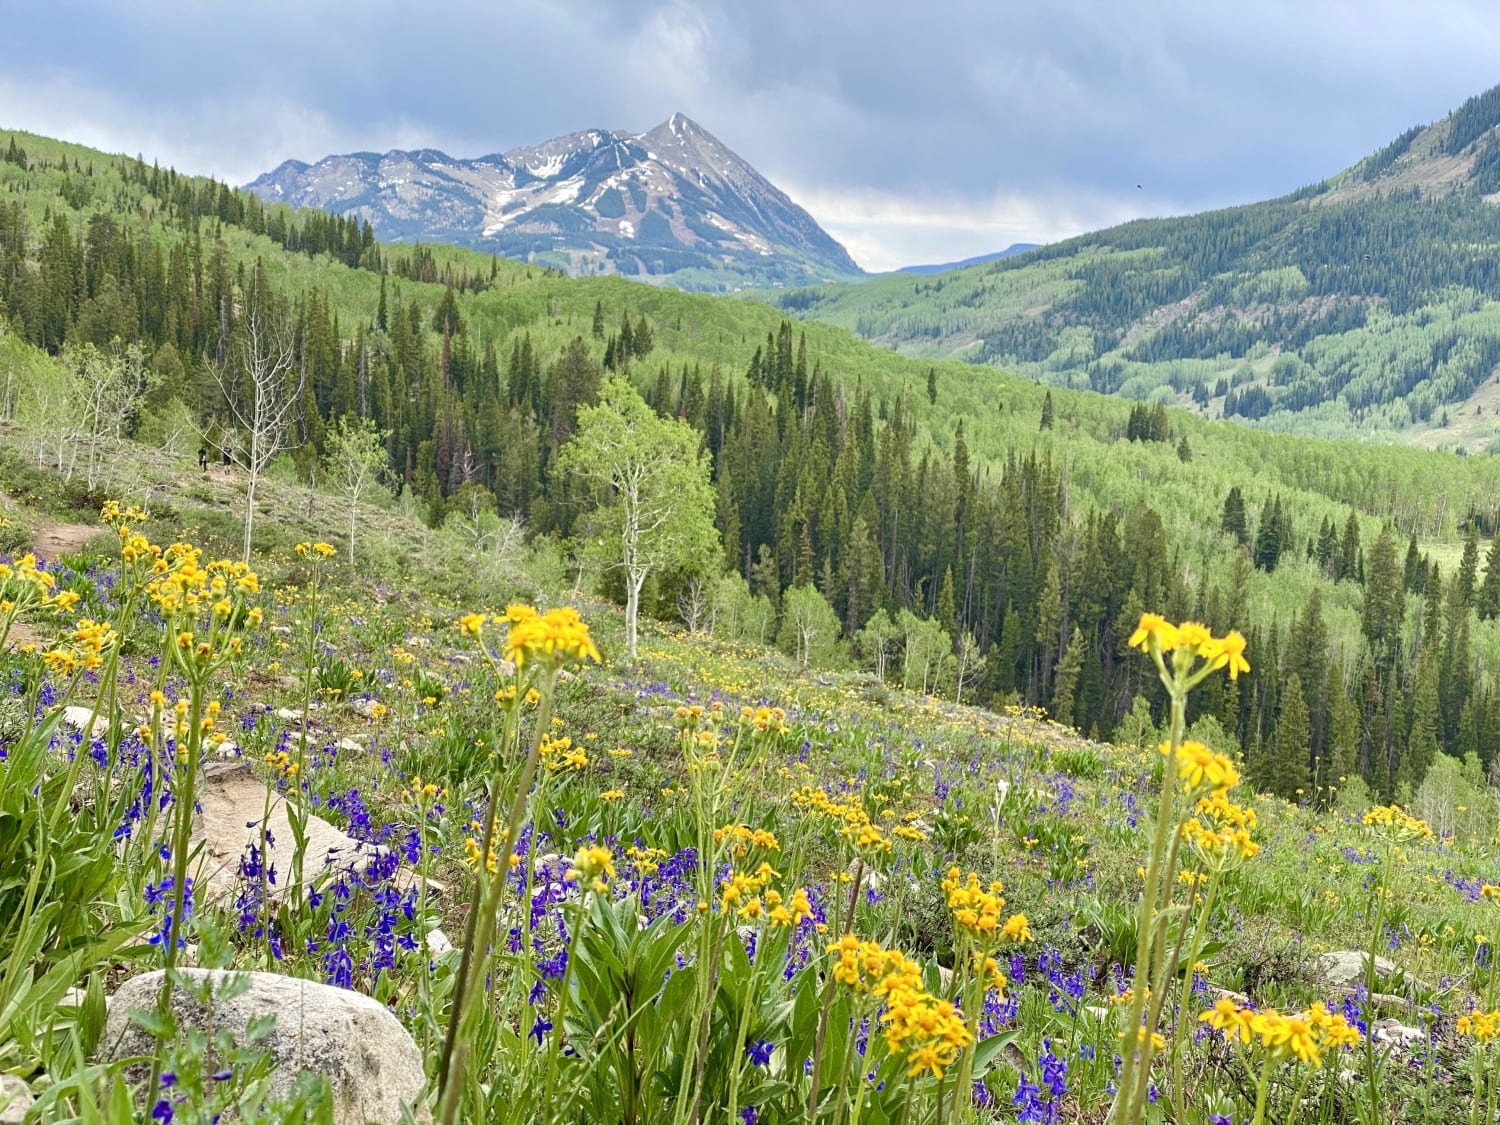 Hiking through the wildflowers on the Judd Falls trail, Crested Butte, Colorado, USA